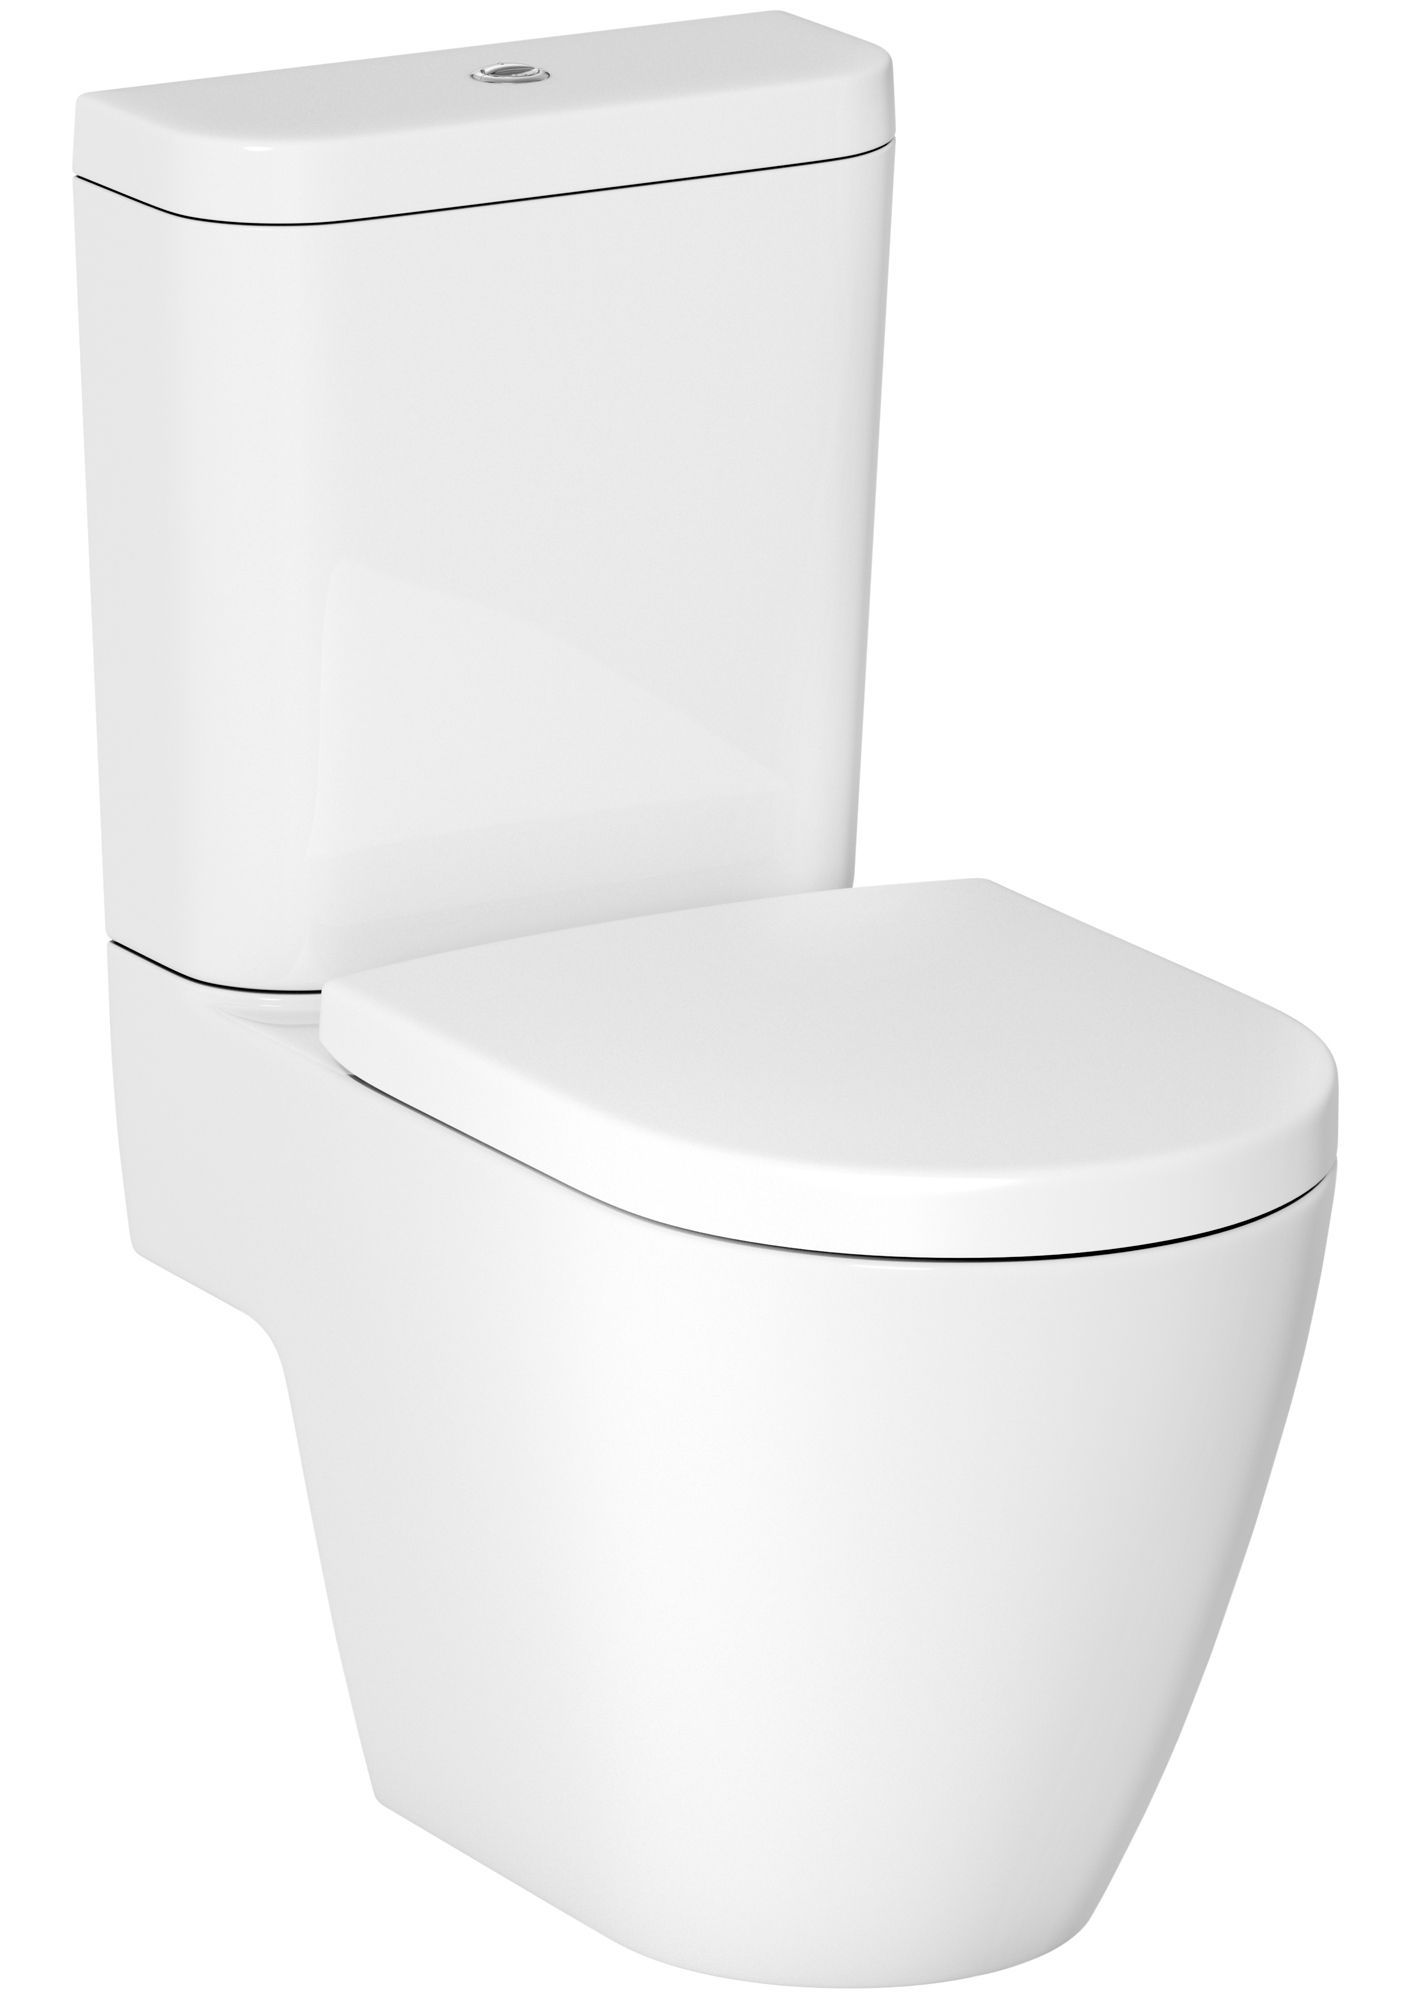 GoodHome Helena White Open back close-coupled Floor-mounted Toilet & cloakroom basin (W)384mm (H)795mm